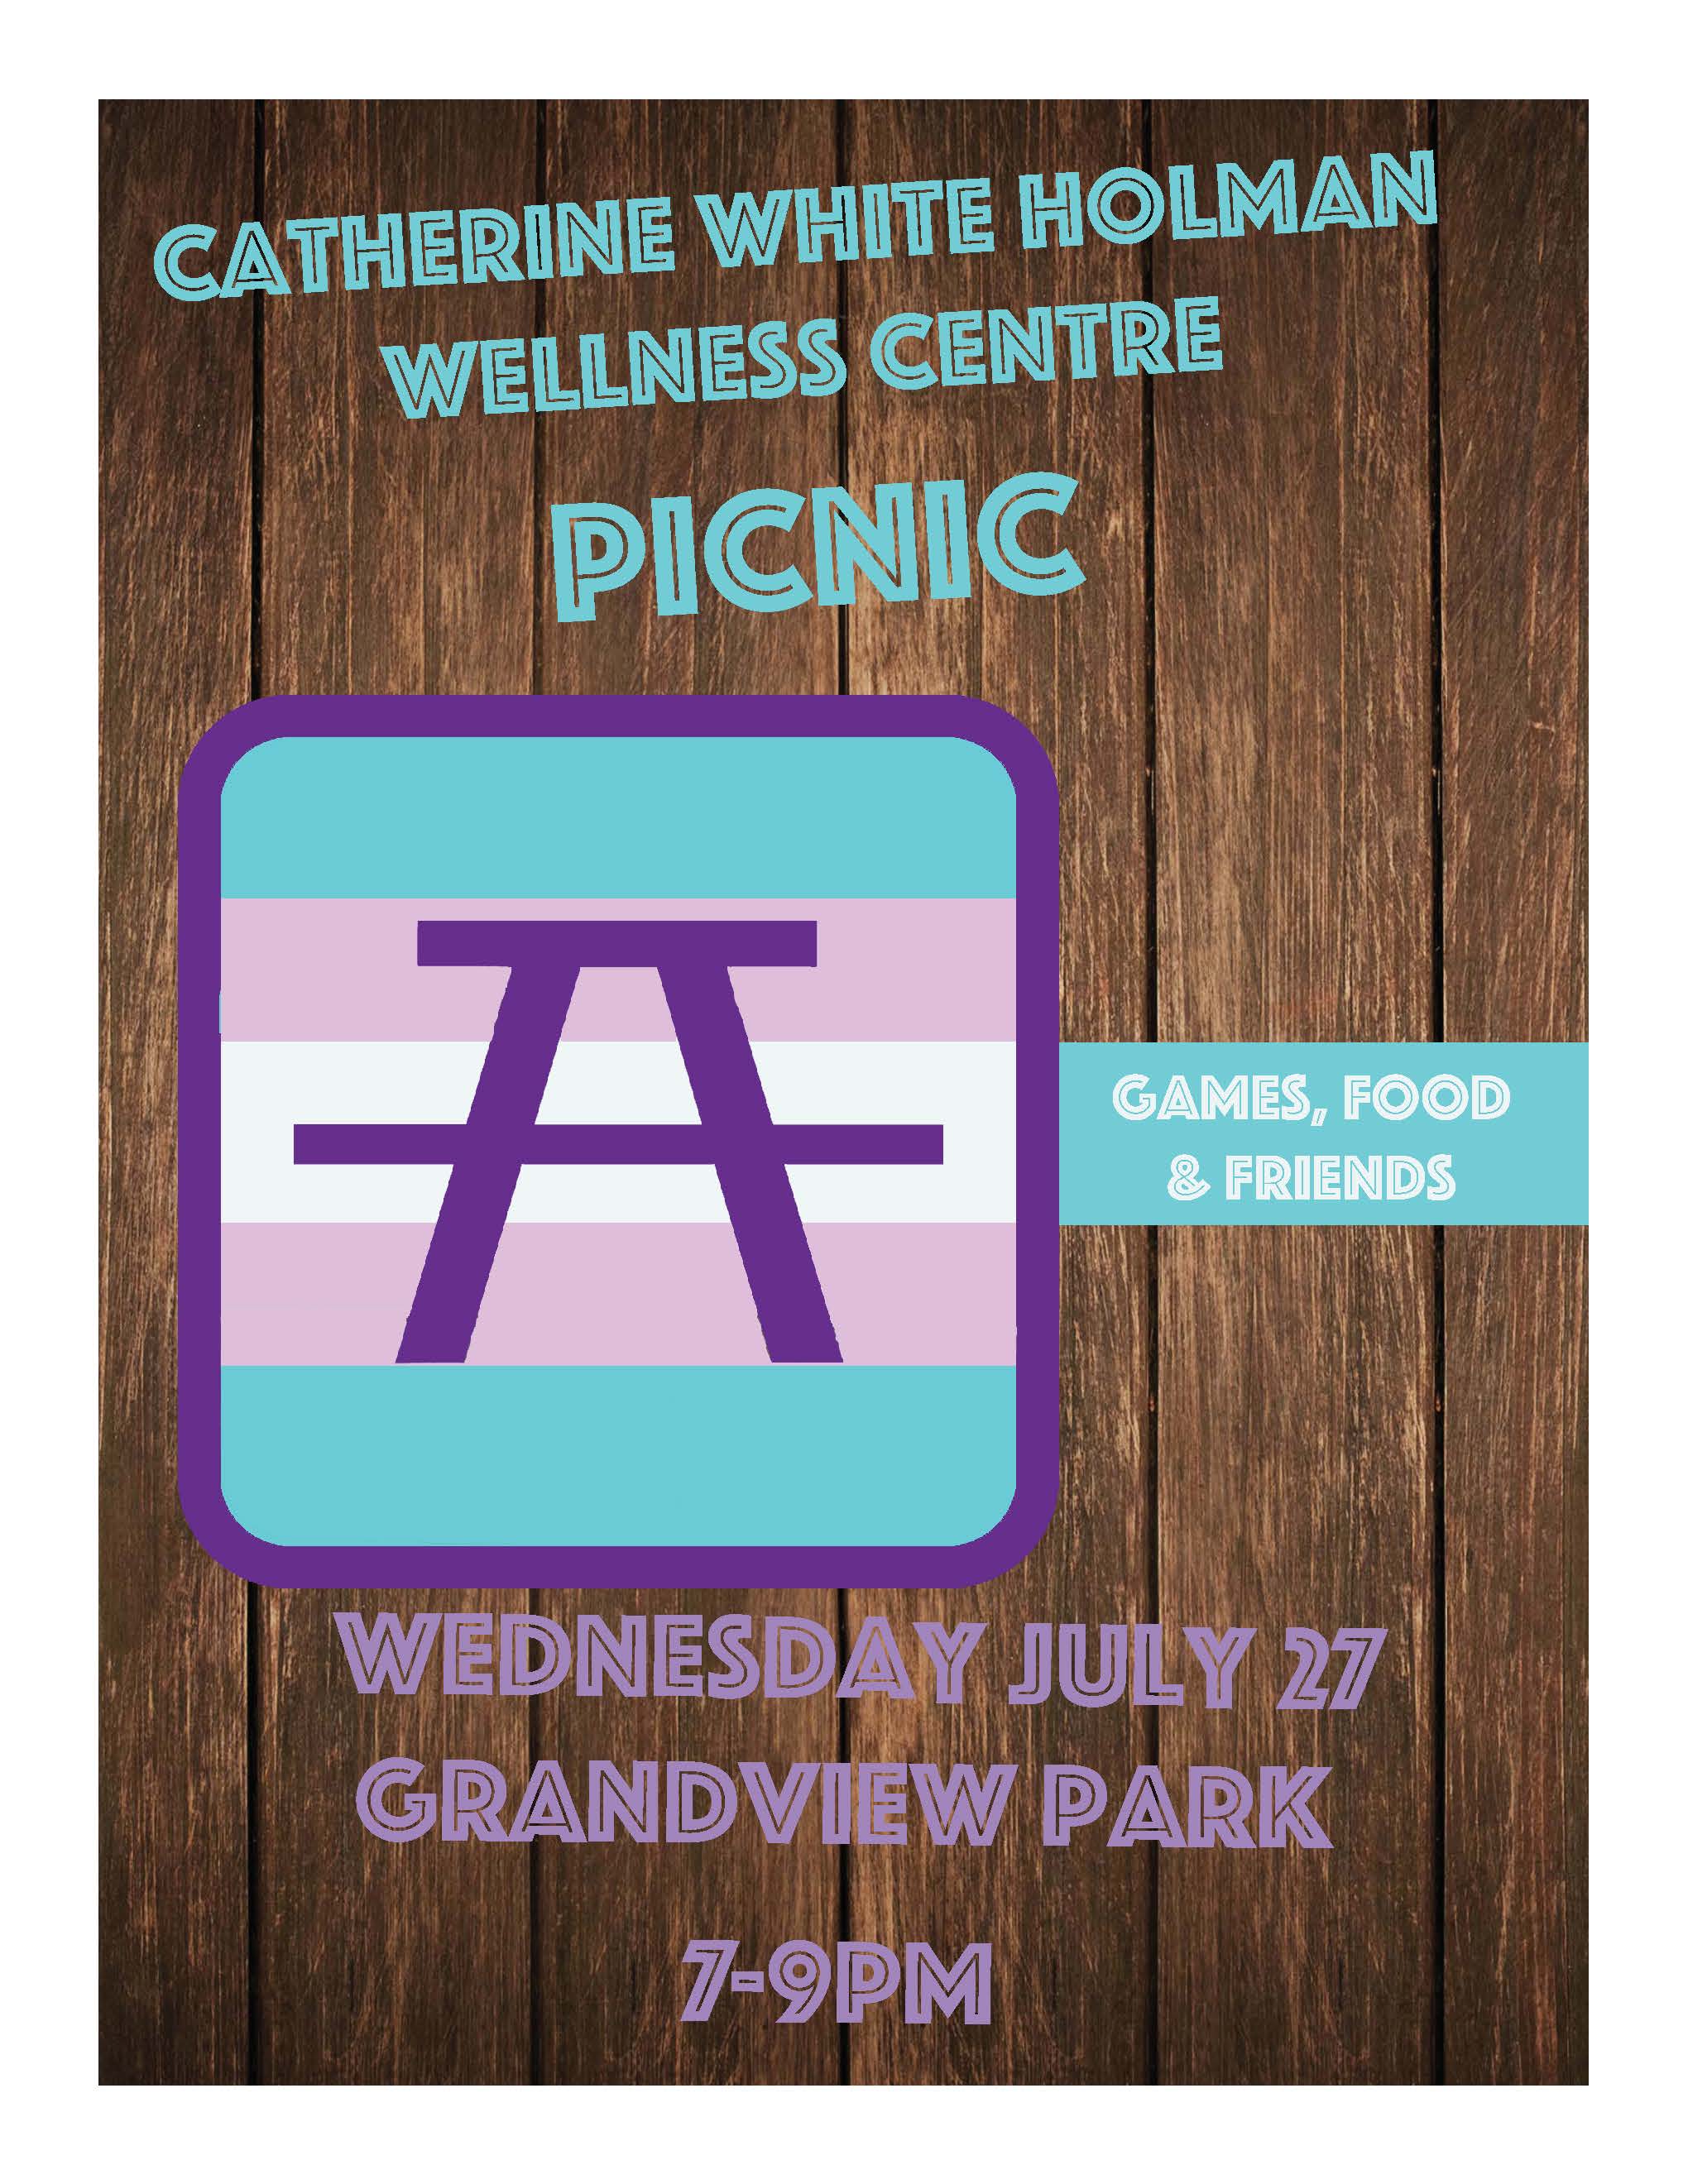 Catherine White Holman Wellness Center Picnic; details in following text.